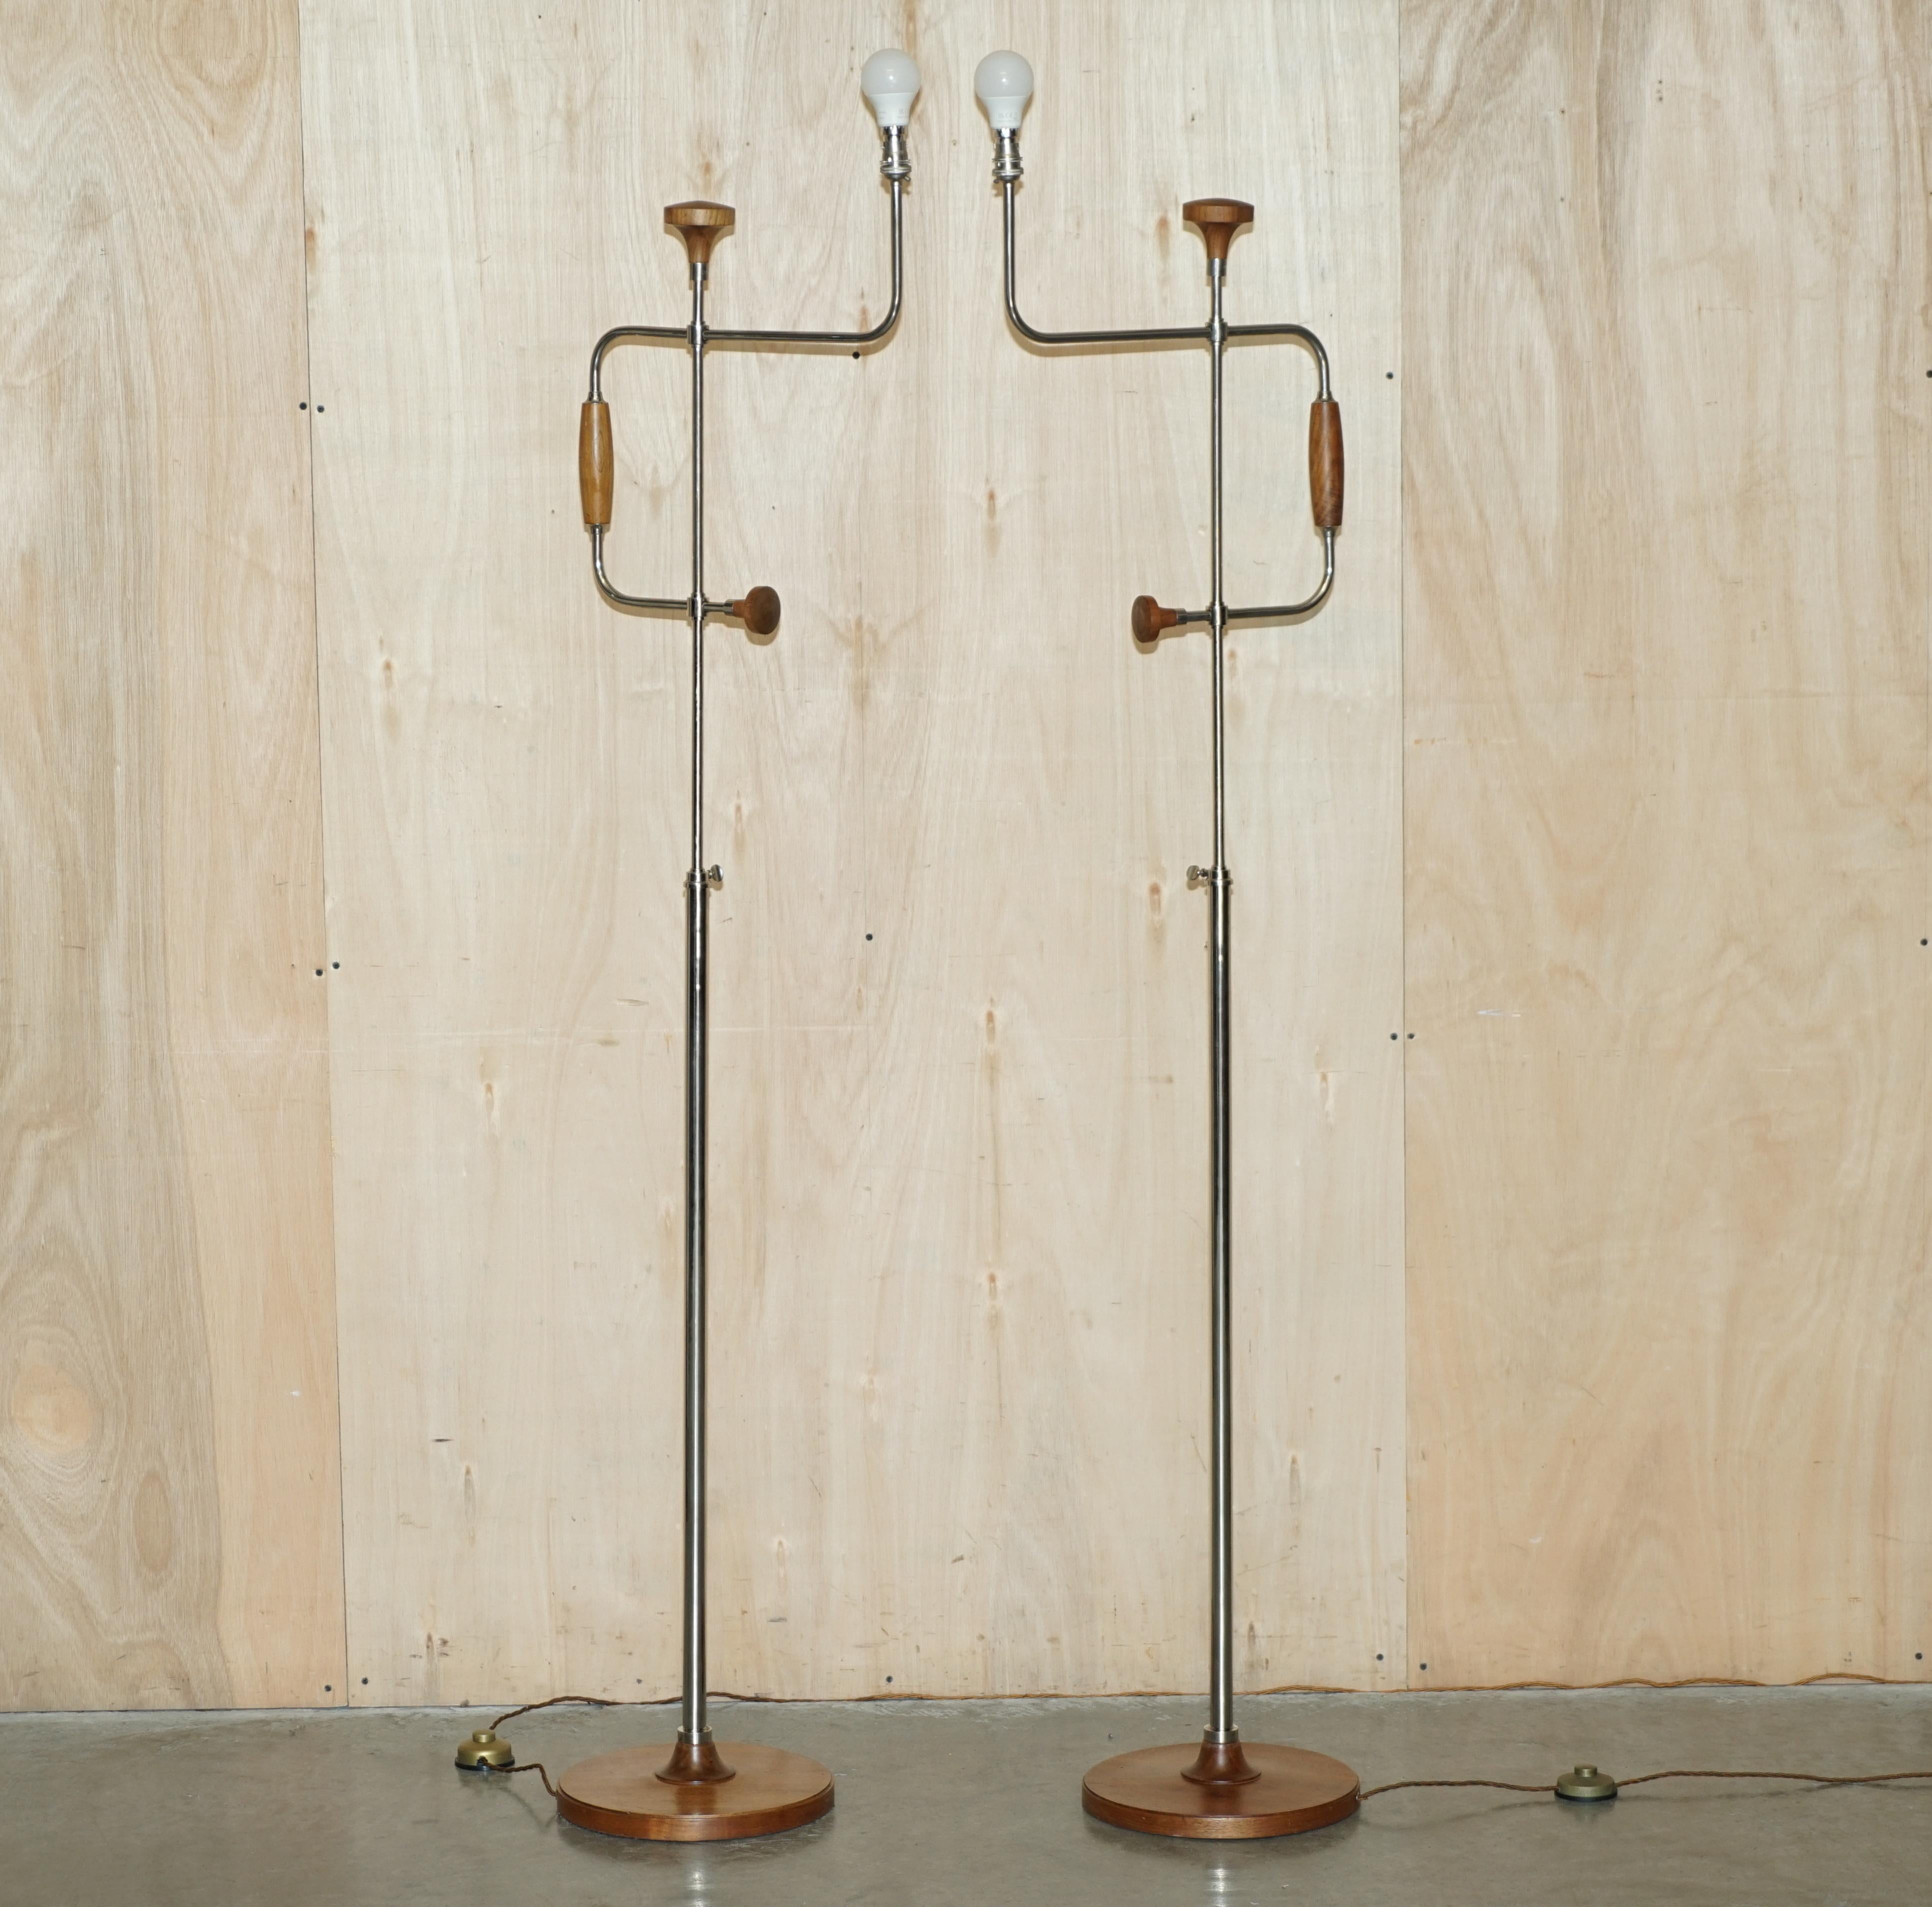 satin nickel floor lamps with evening delivery within m25